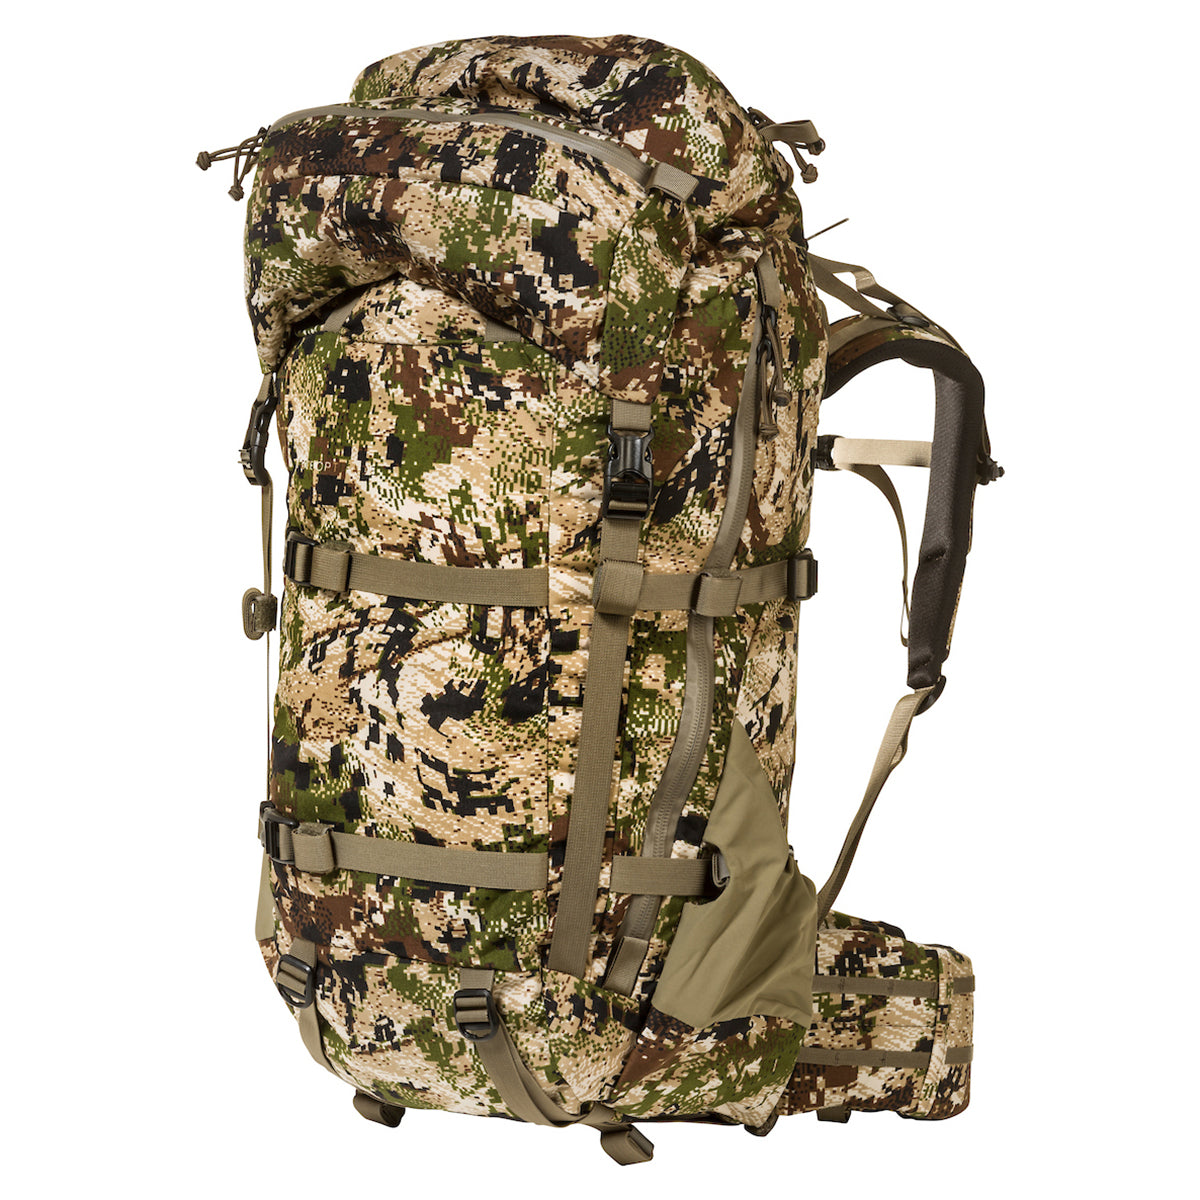 Mystery Ranch Pack, Camo Hunting Backpack